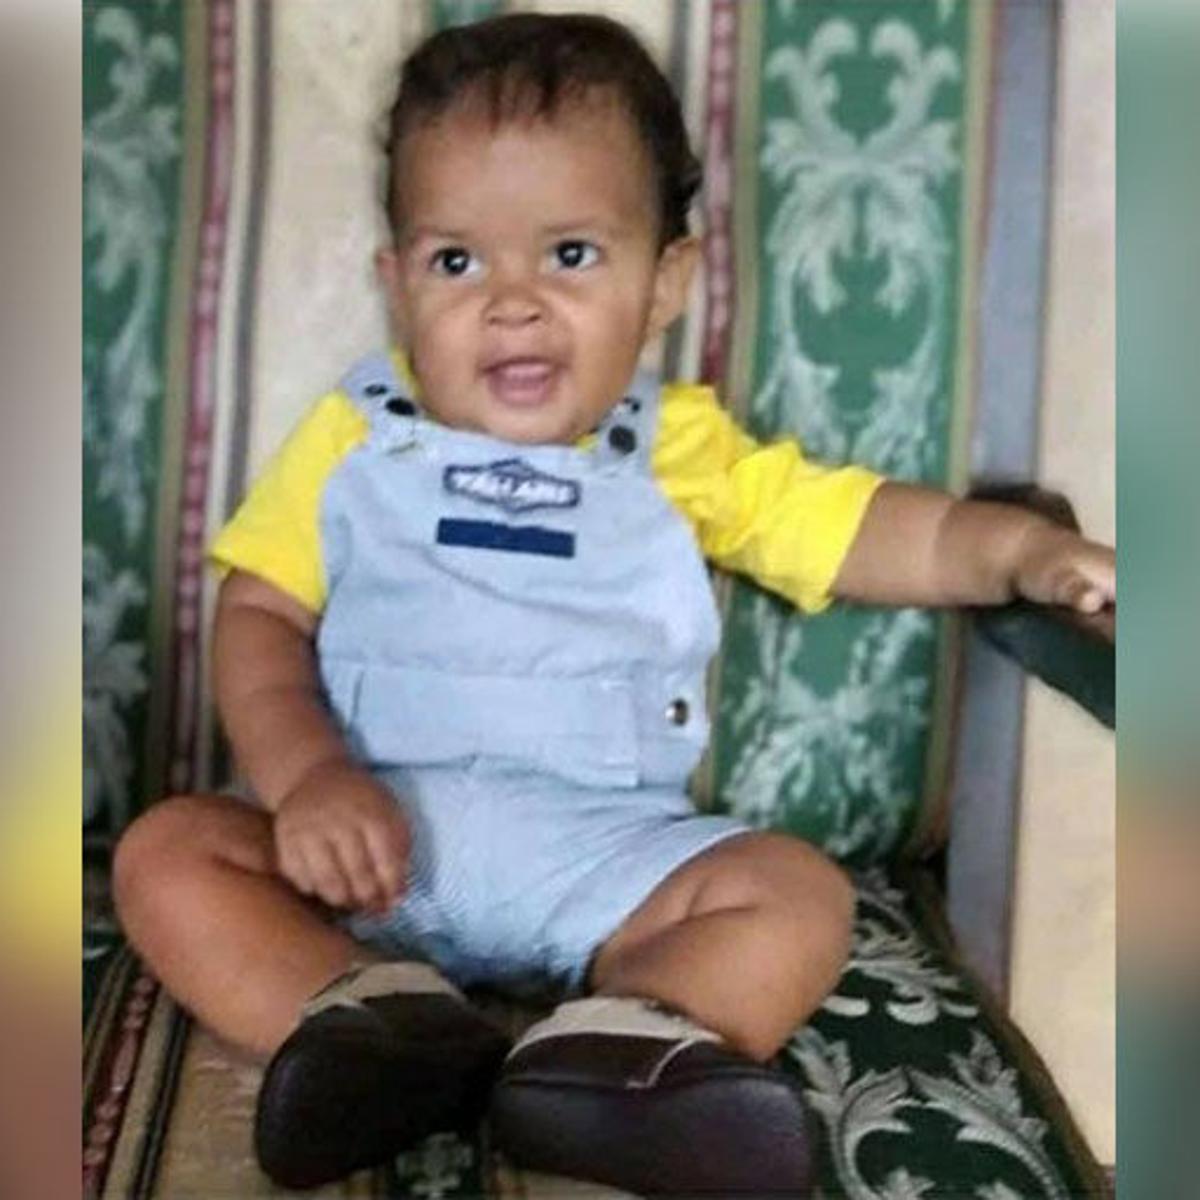 UN human rights groups want probe into death of Venezuelan toddler